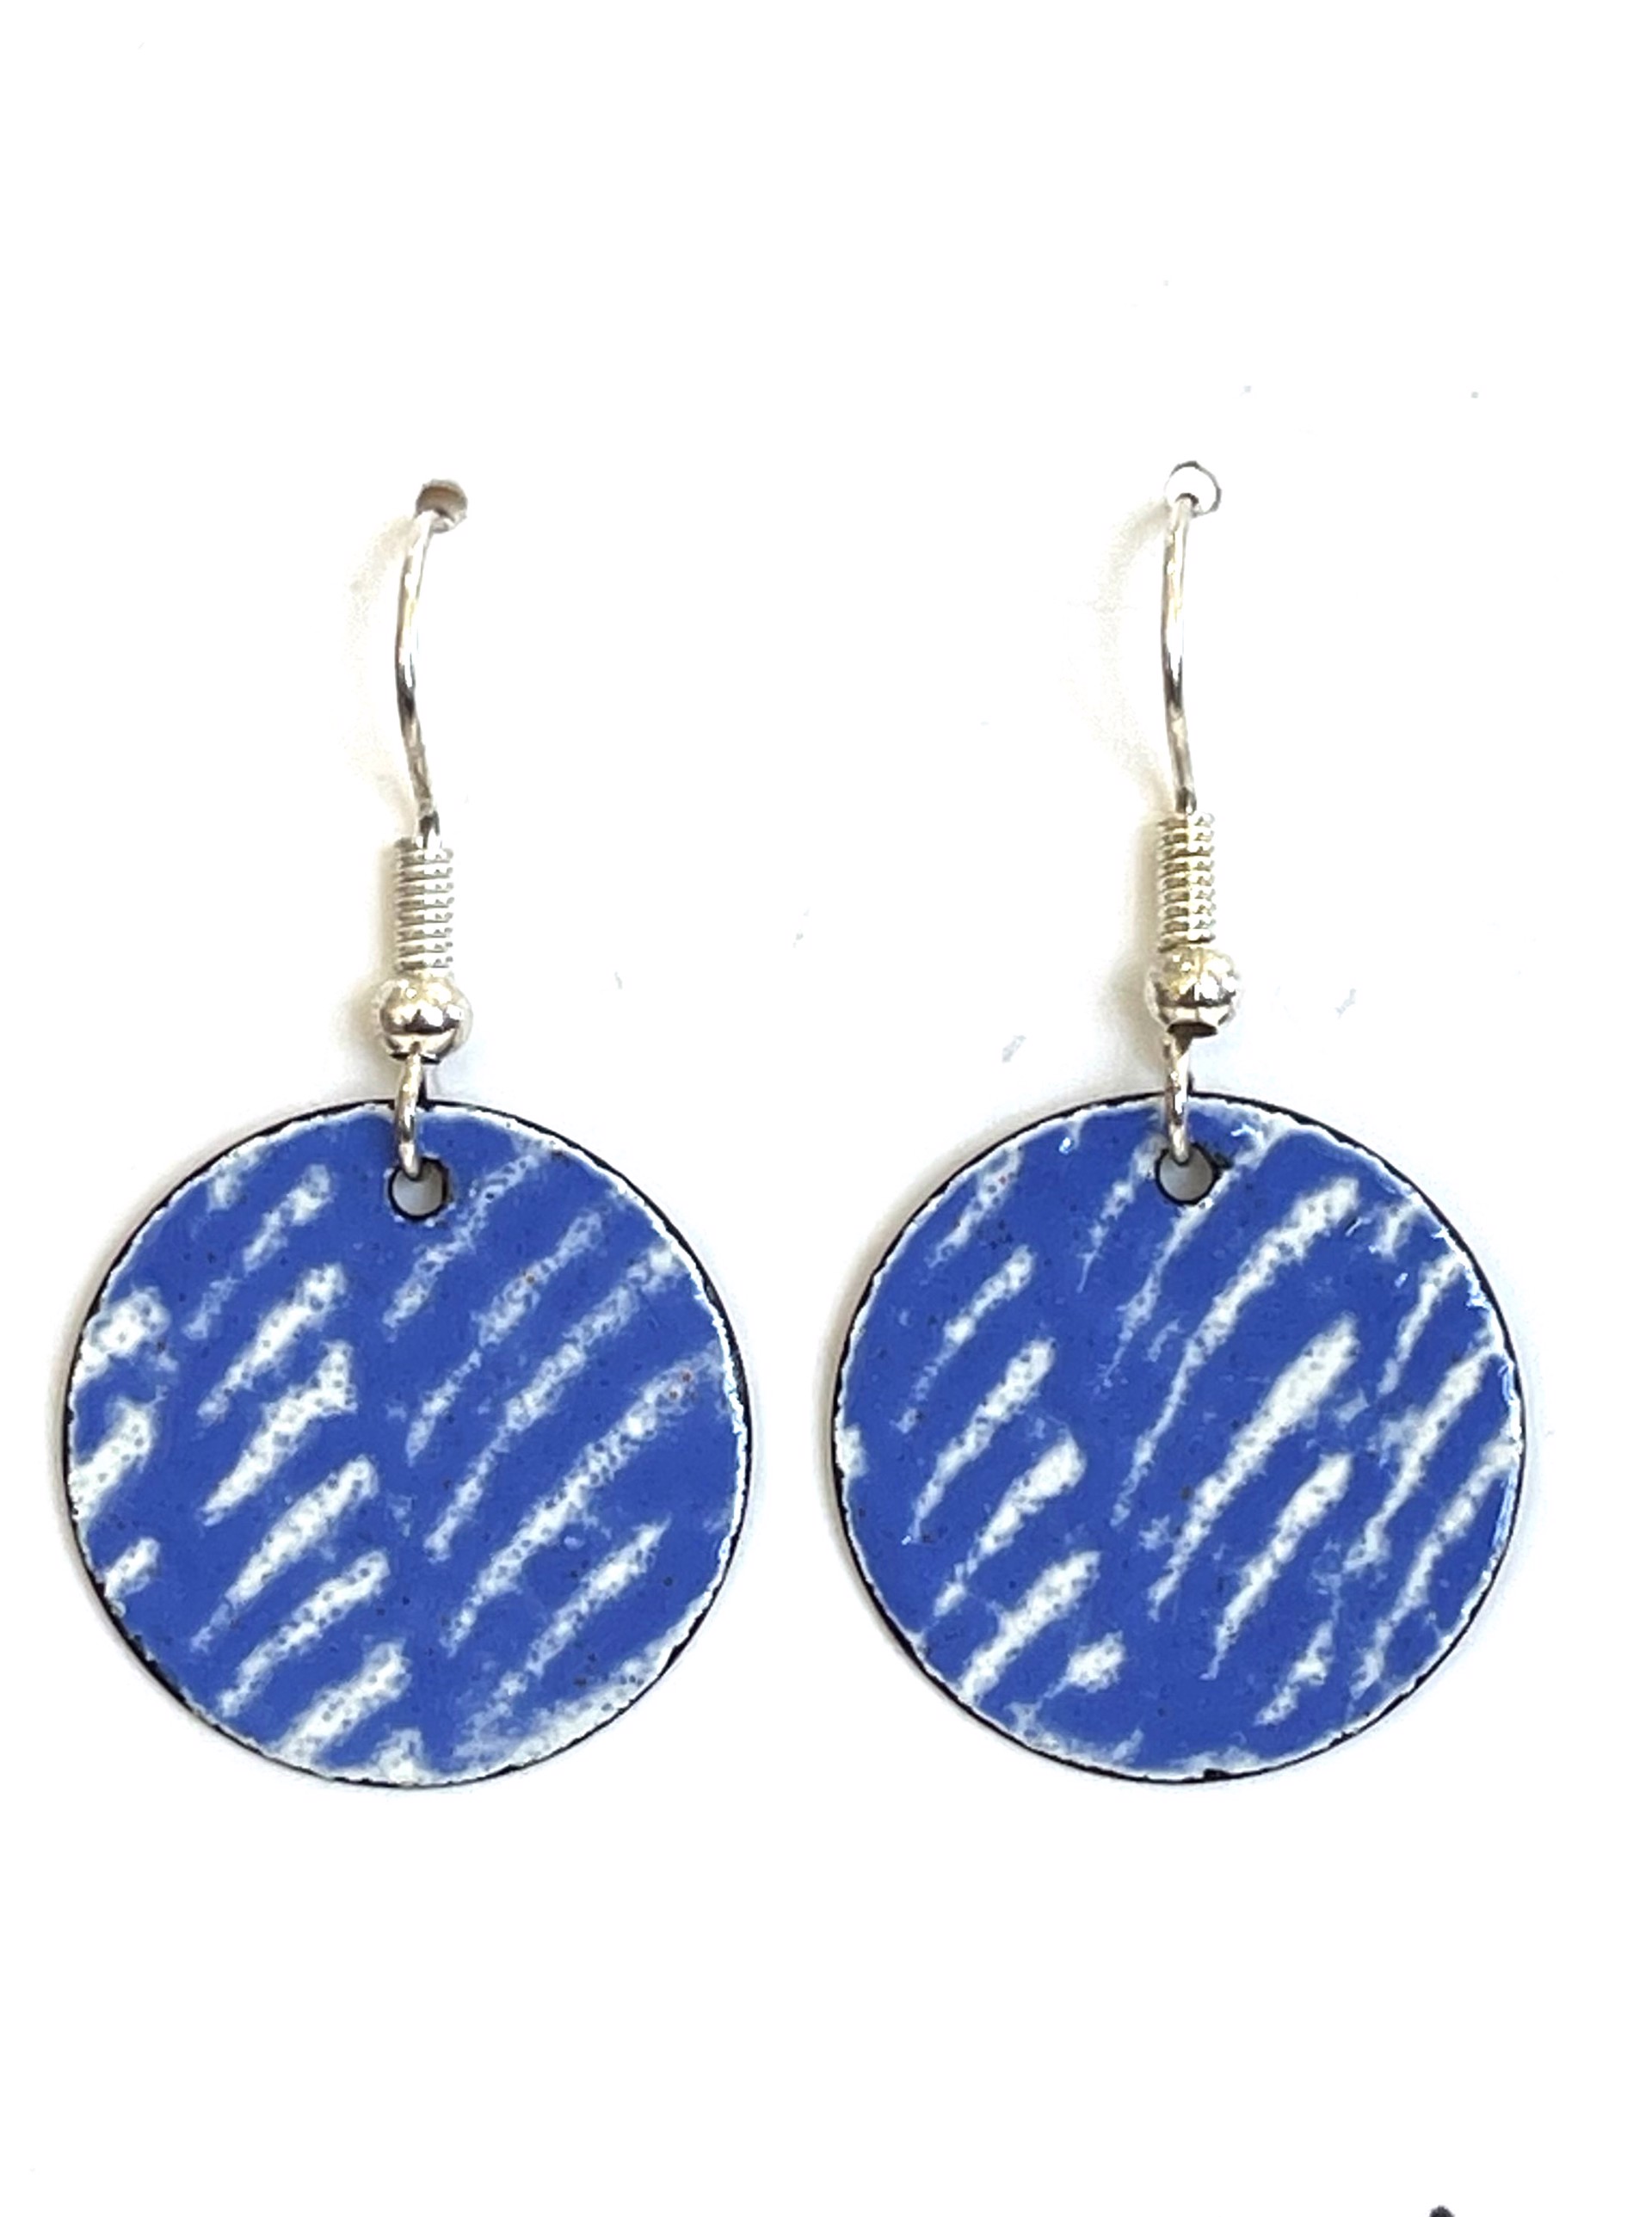 CT 7.0 Abstract White Blue Earrings by Cathy Talbot